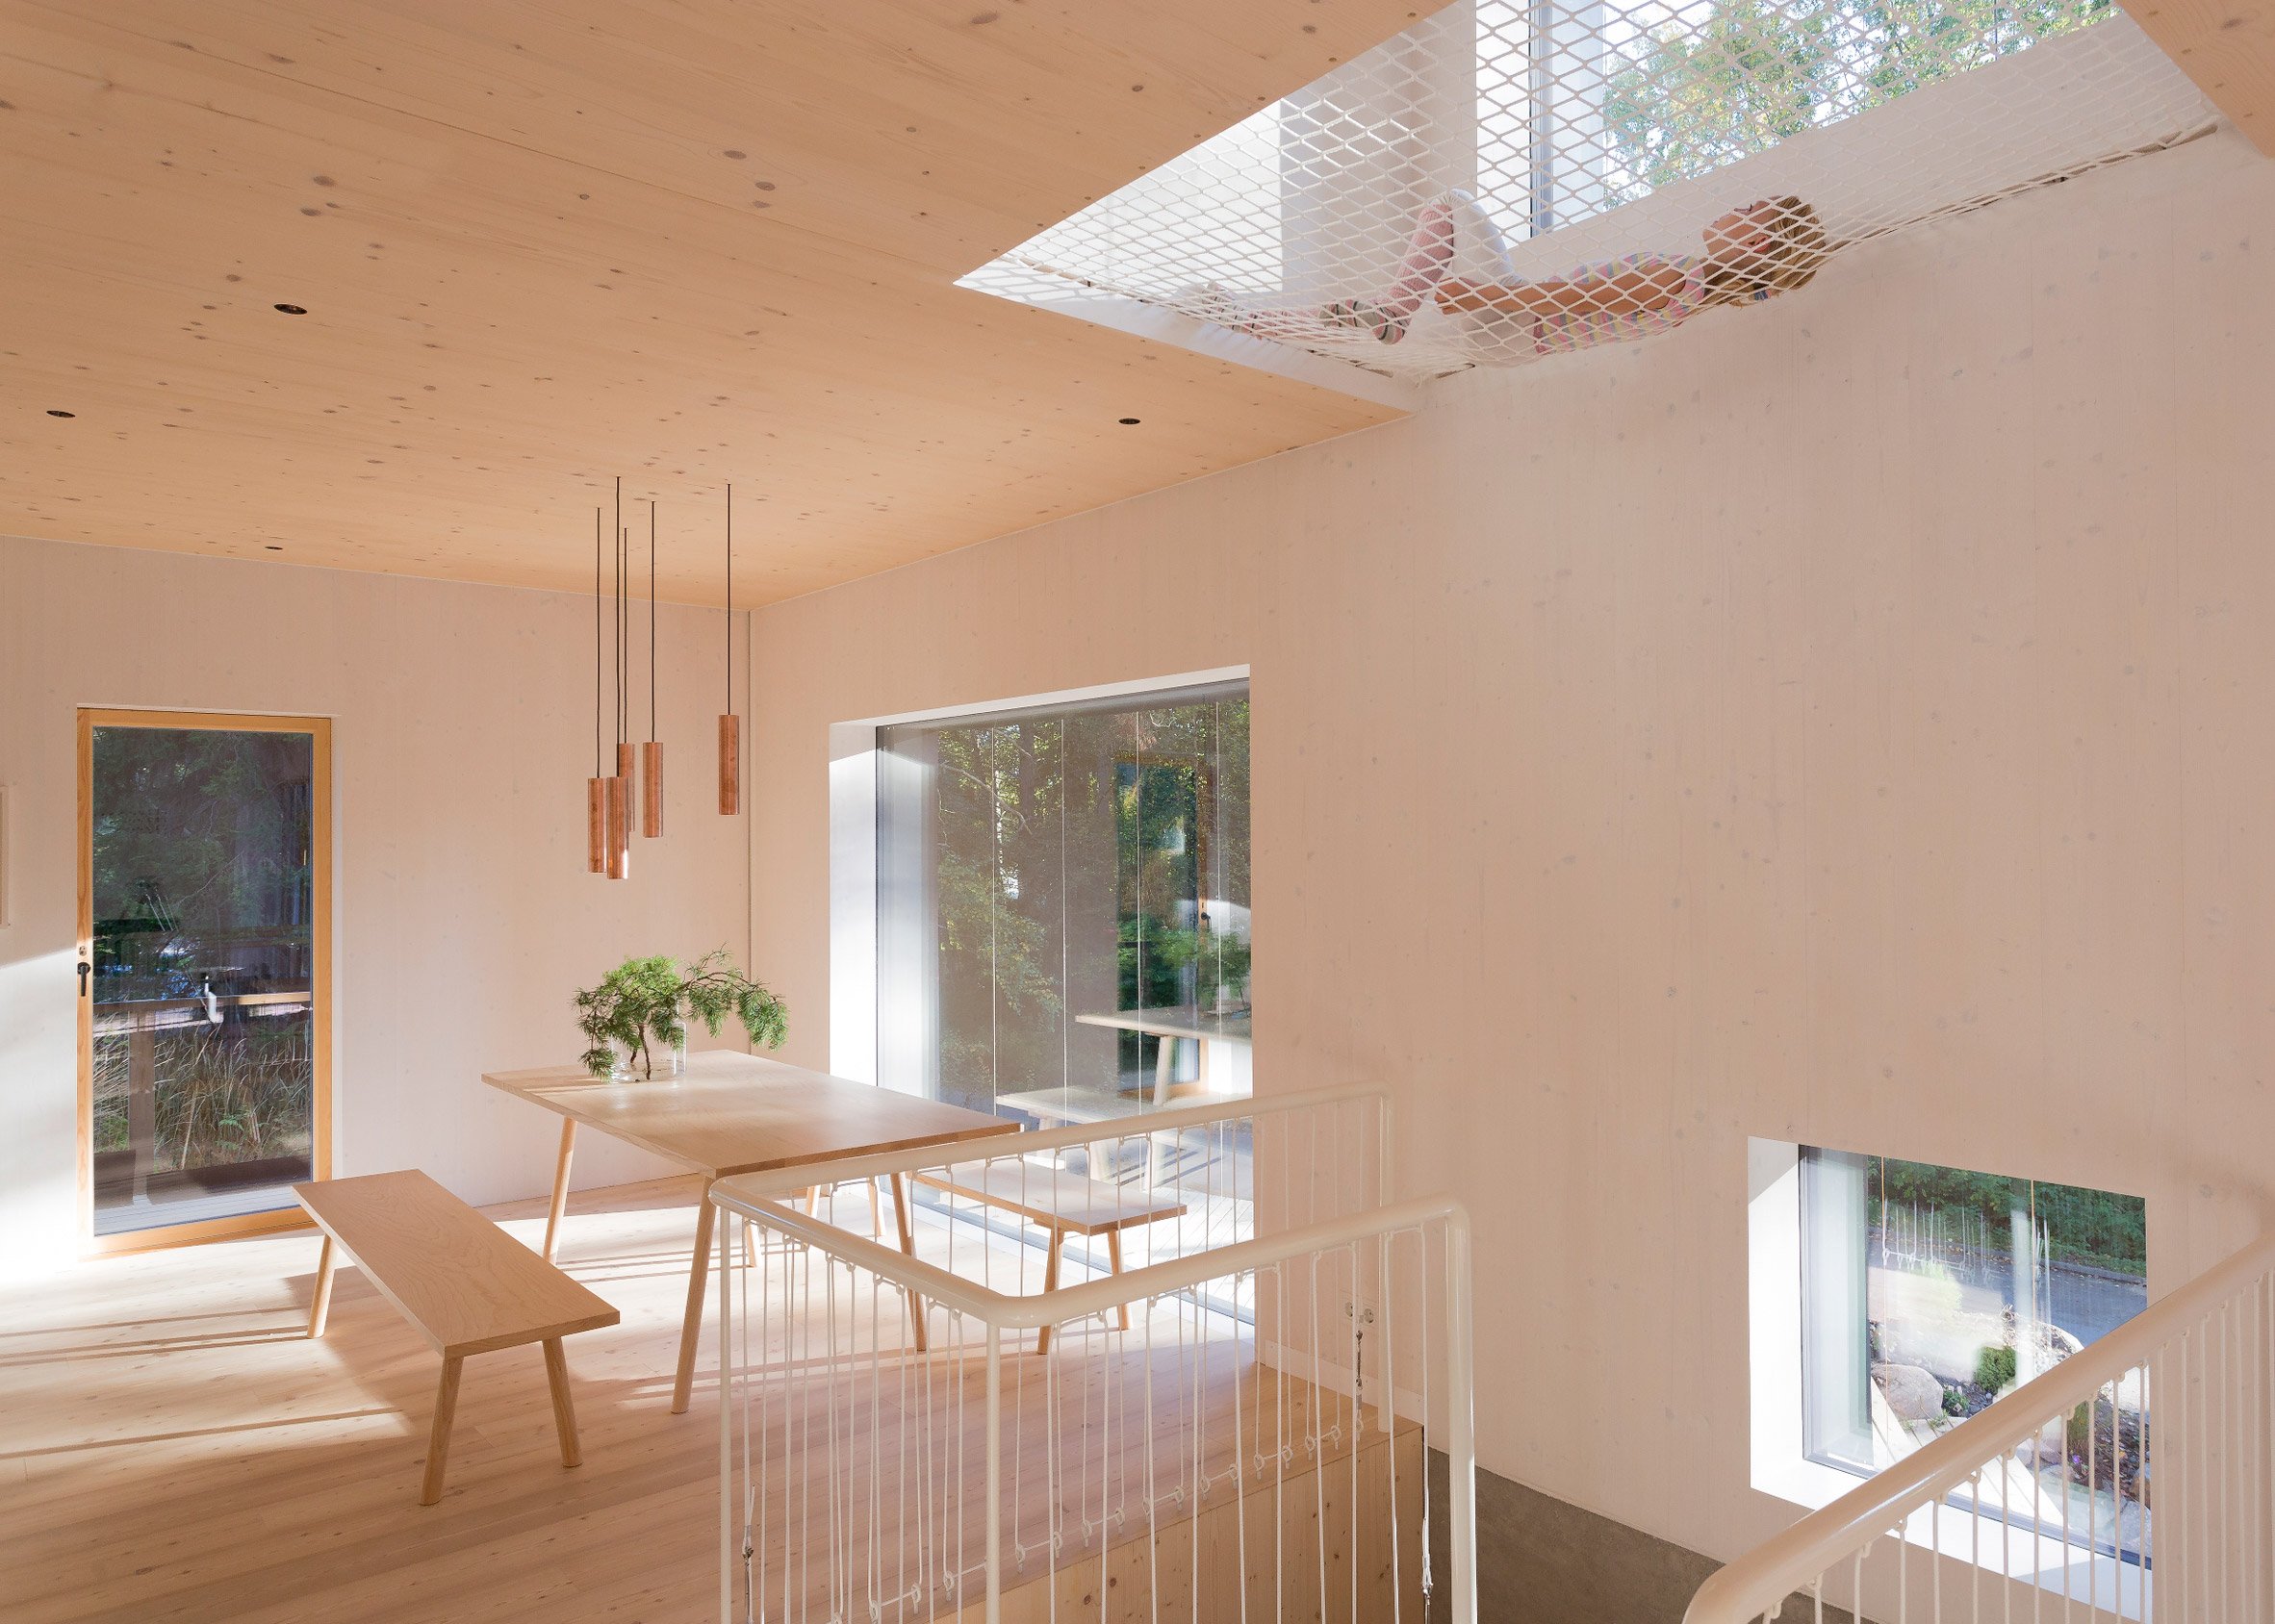 Net floor above living area in house designed by Ortraum Architects